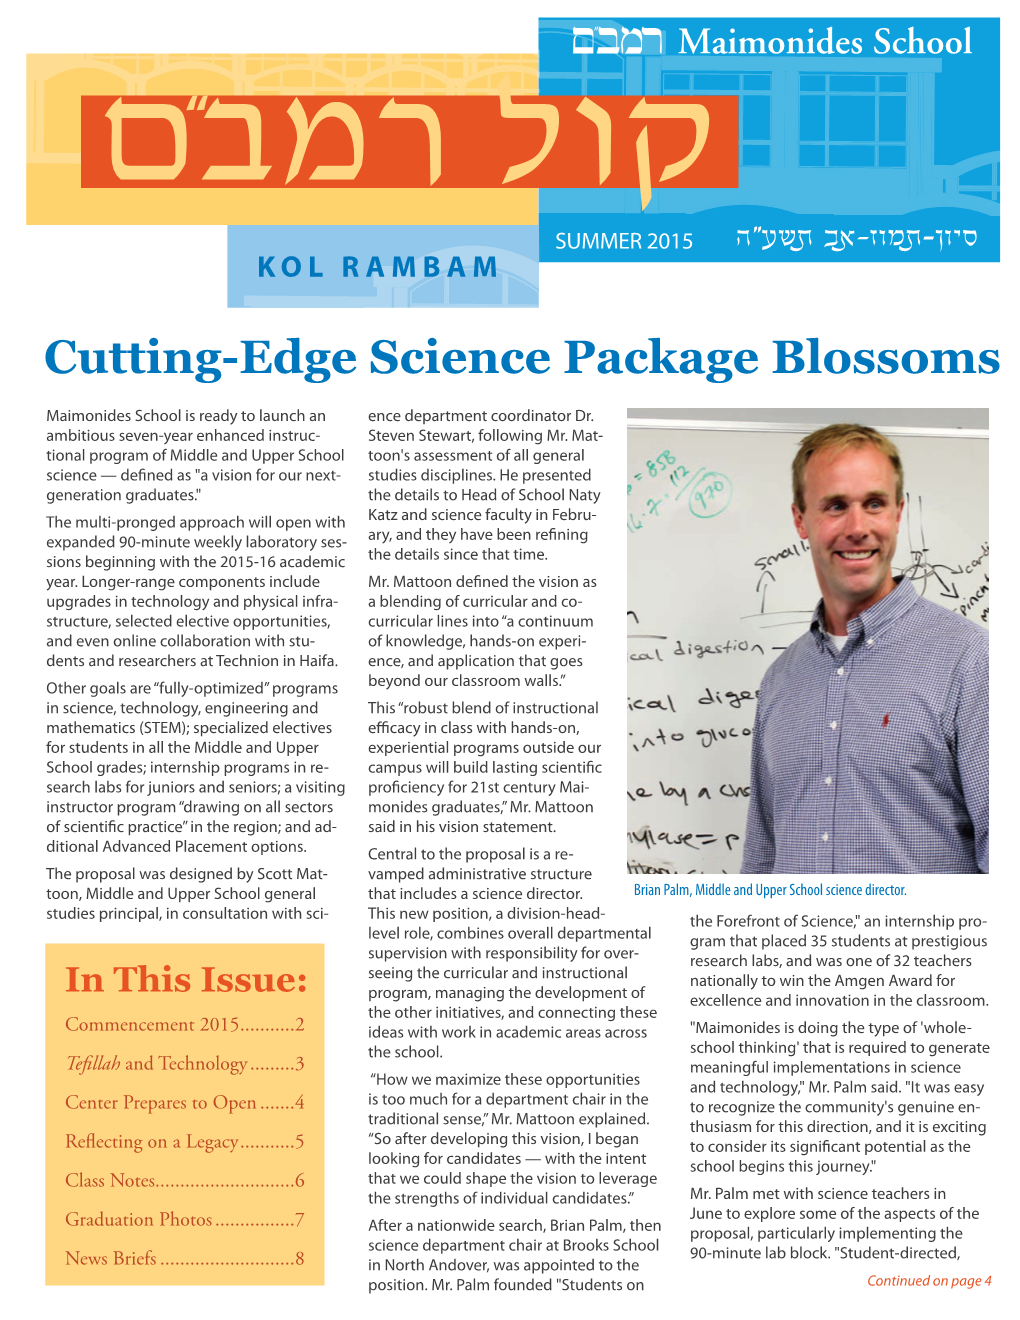 Cutting-Edge Science Package Blossoms